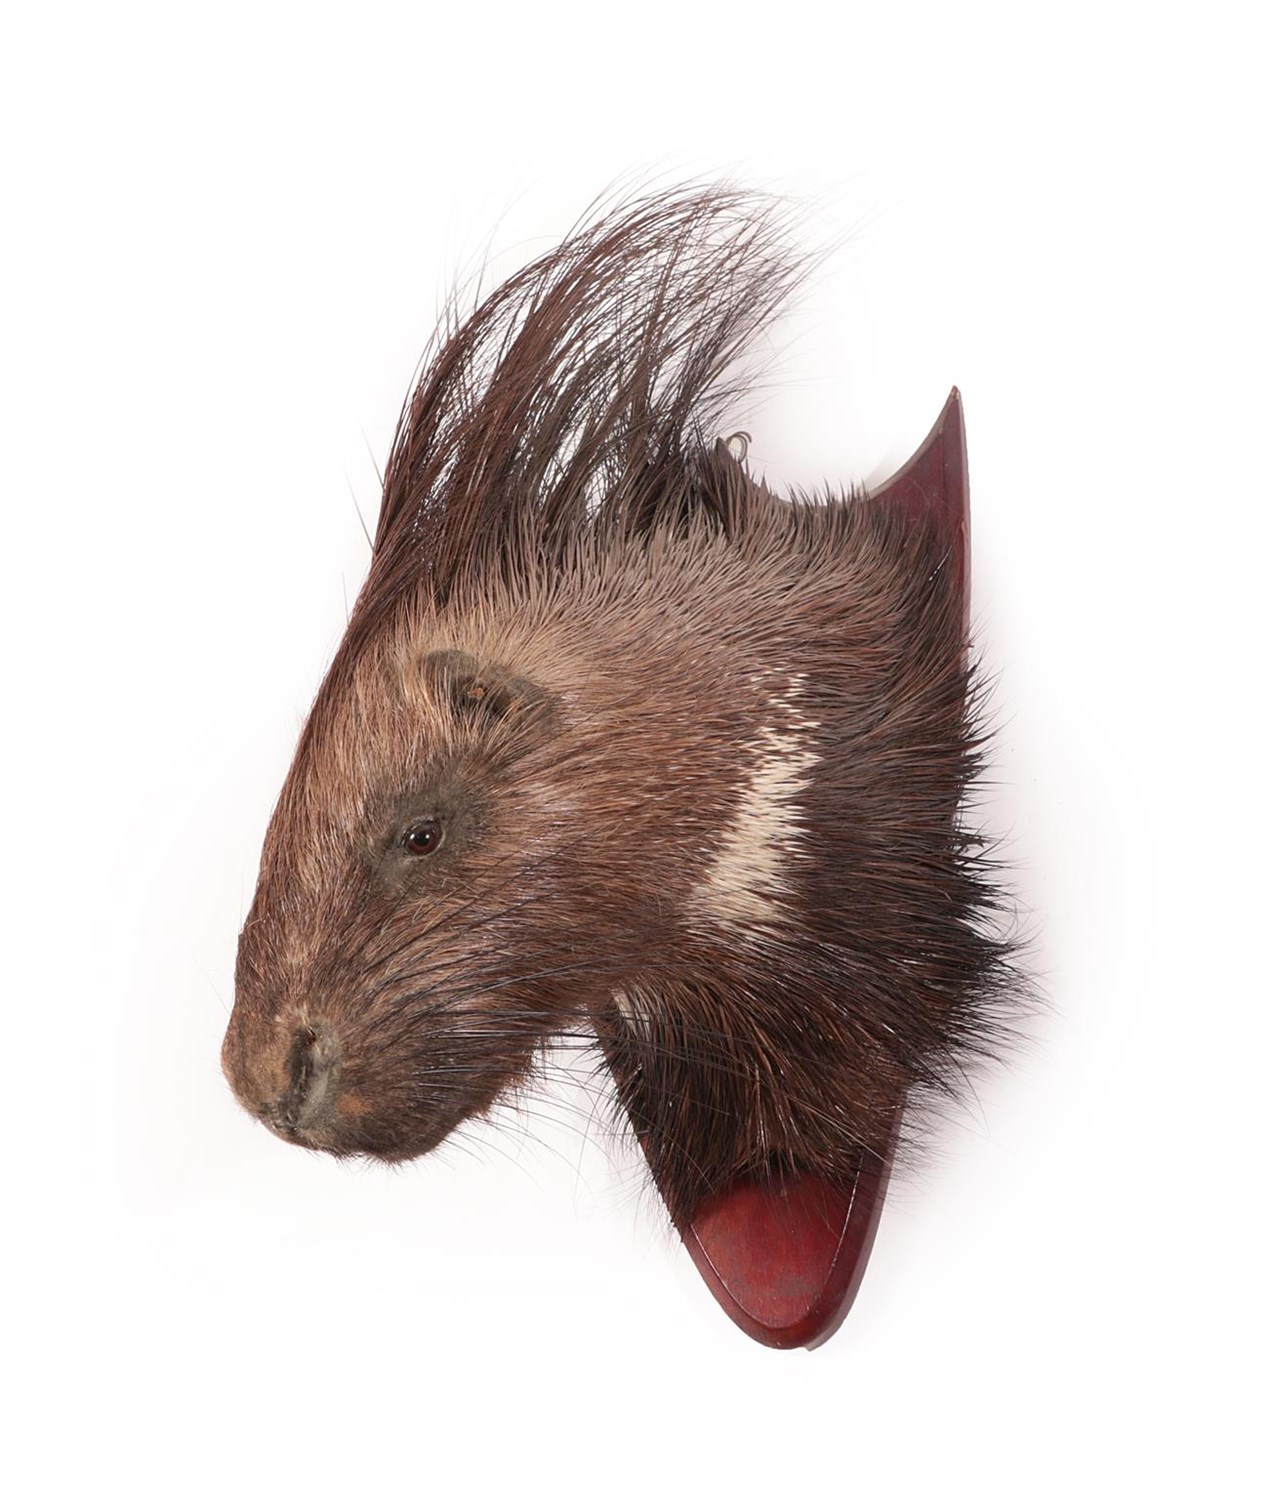 Lot 57 - Taxidermy: Indian Crested Porcupine (Hystrix indica), circa mid-late 20th century, adult head mount